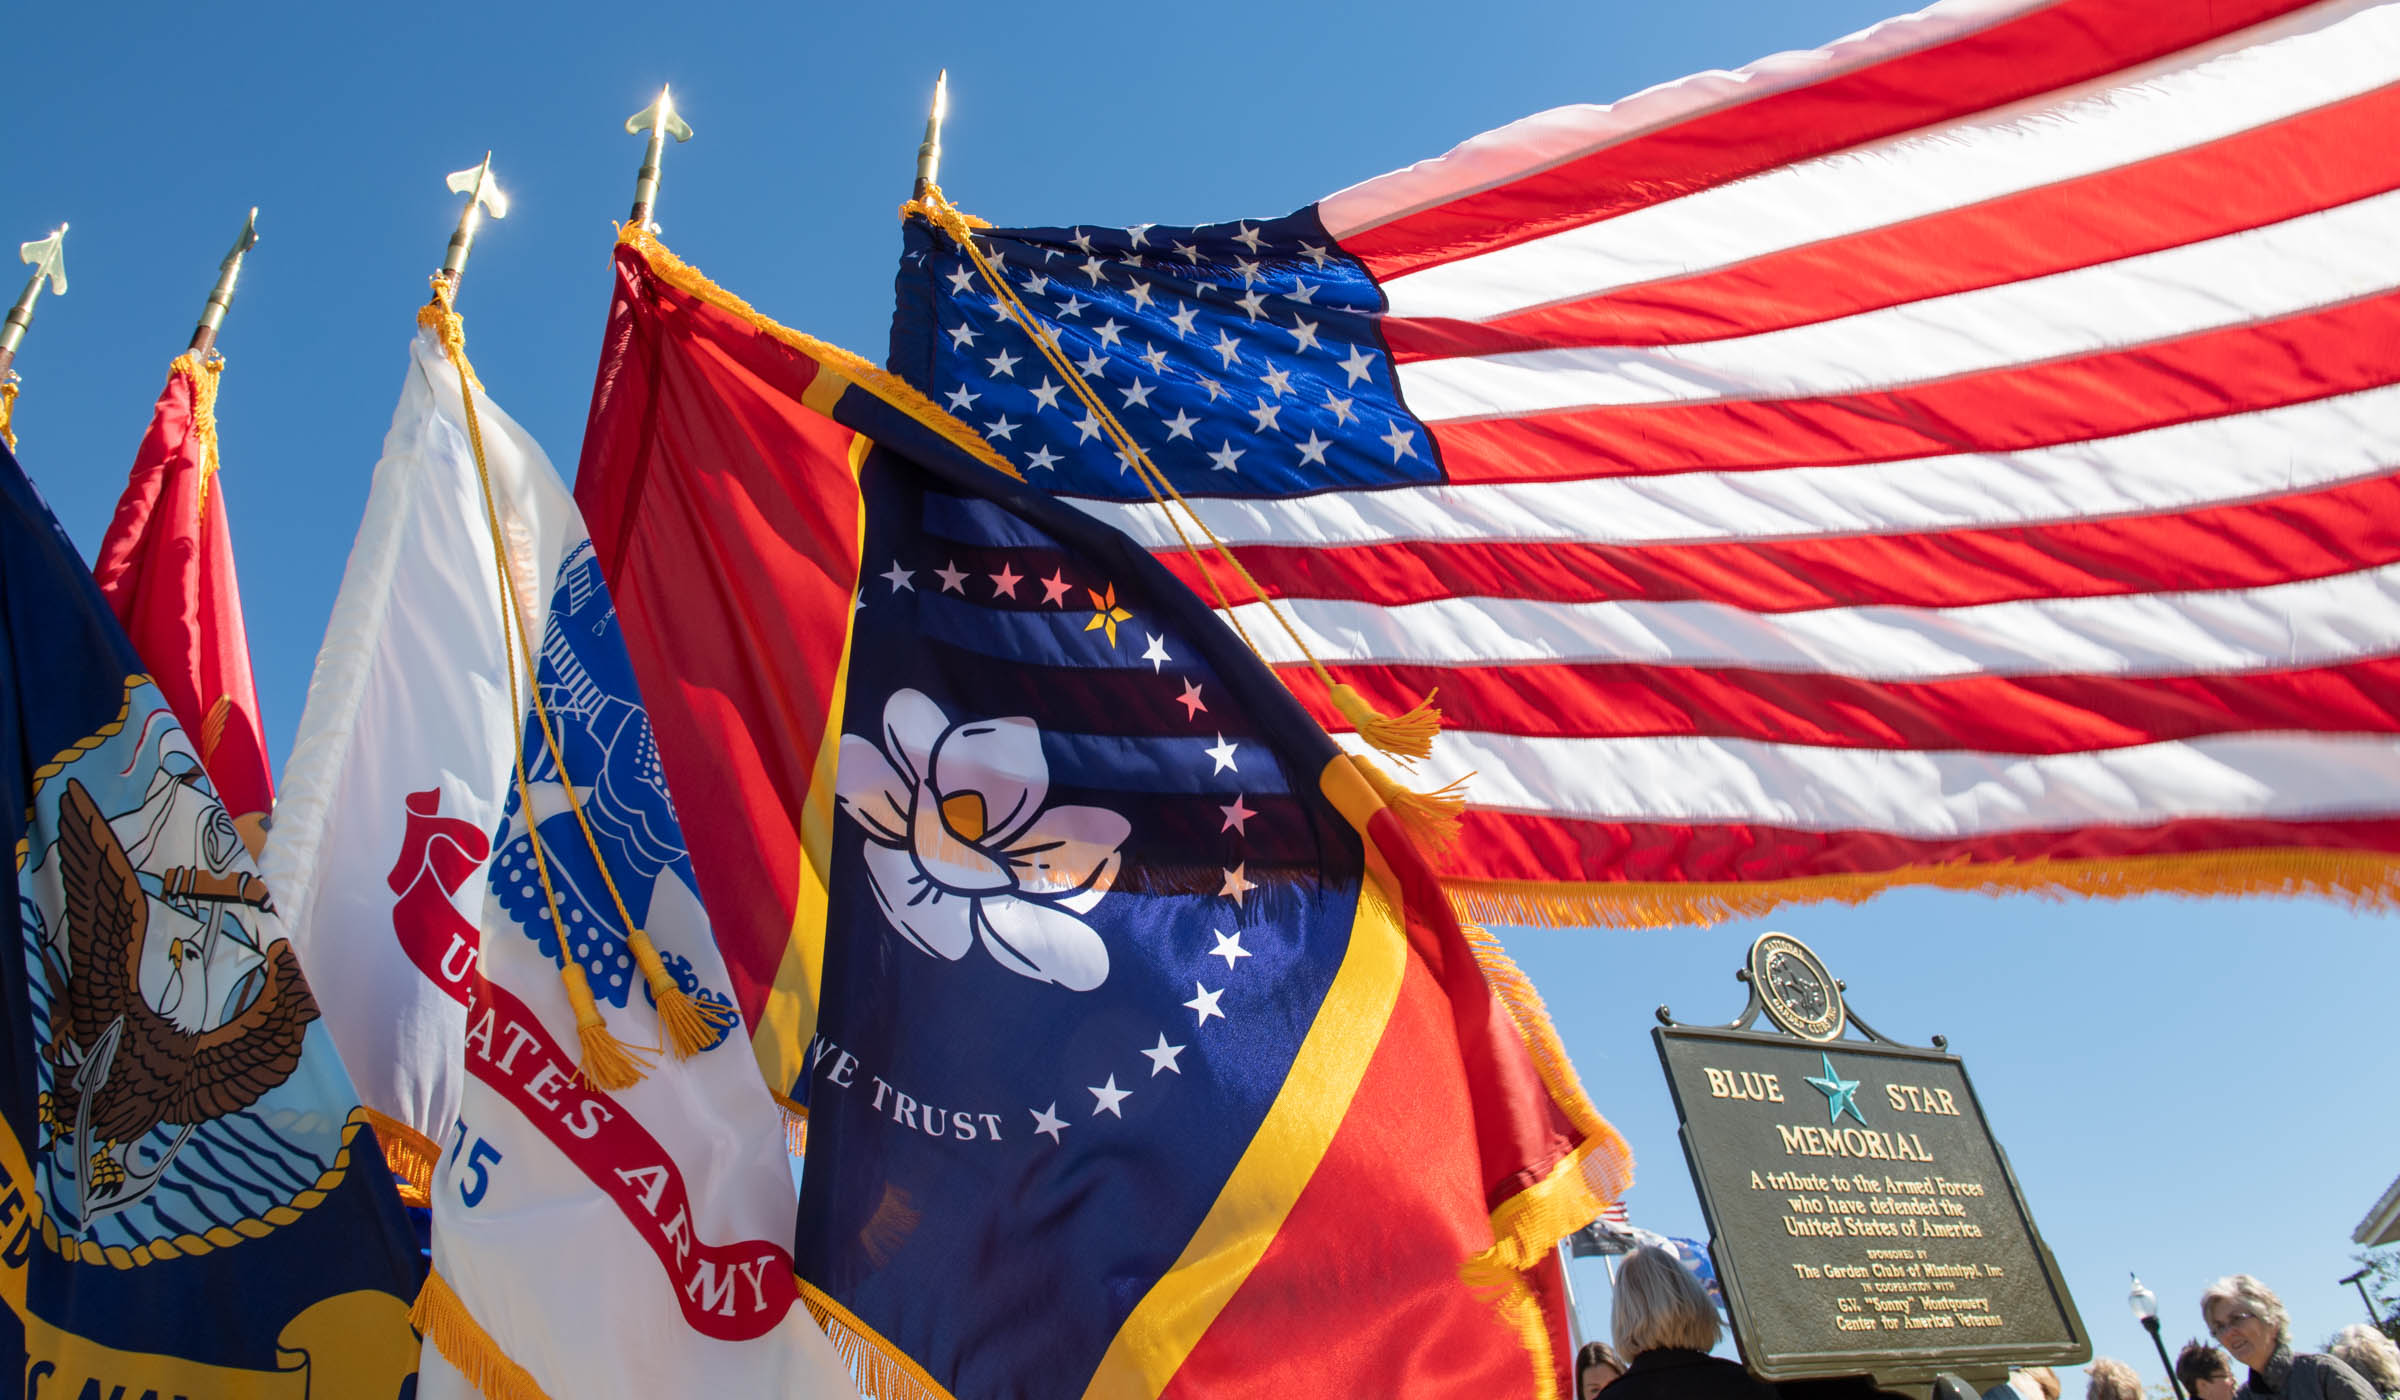 The freshly unveiled Blue Star Memorial is on the bottom right, framed by blowing flags of the US, MS, and Armed Forces.